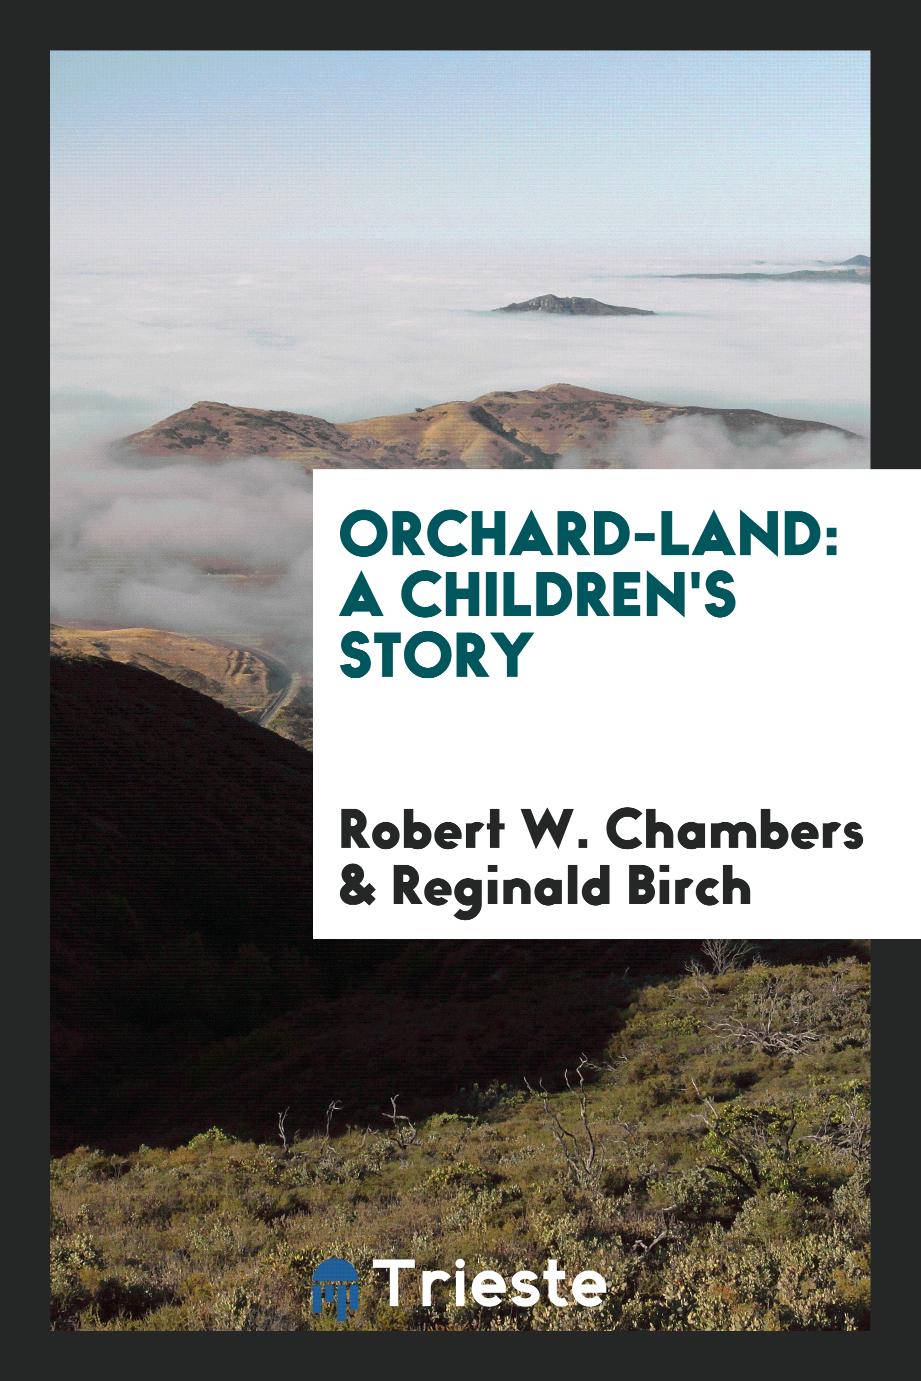 Orchard-Land: A Children's Story